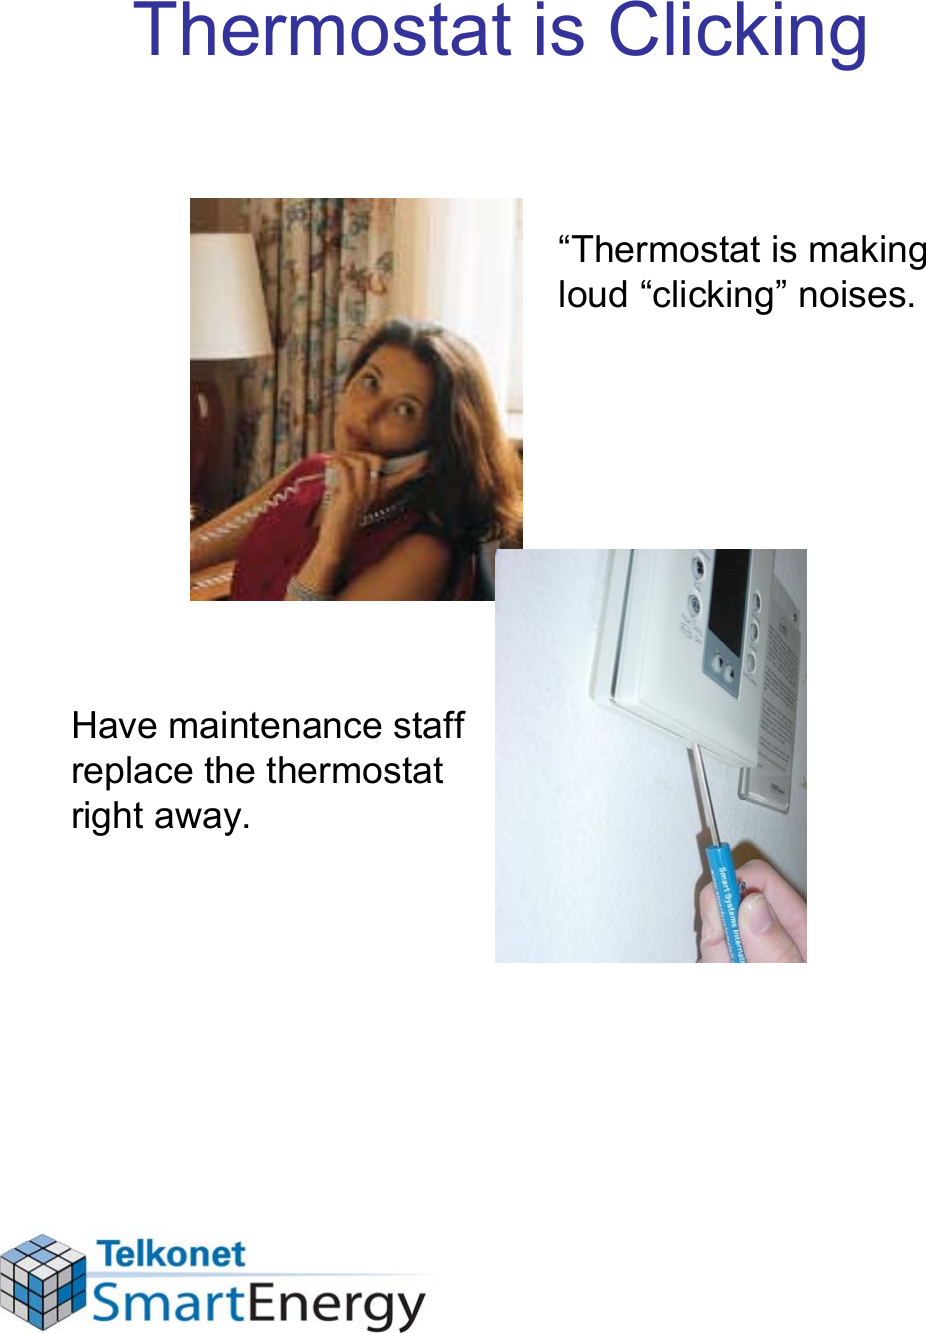 Thermostat is Clicking“Thermostat is making loud “clicking” noises.Have maintenance staff replace the thermostat right away.